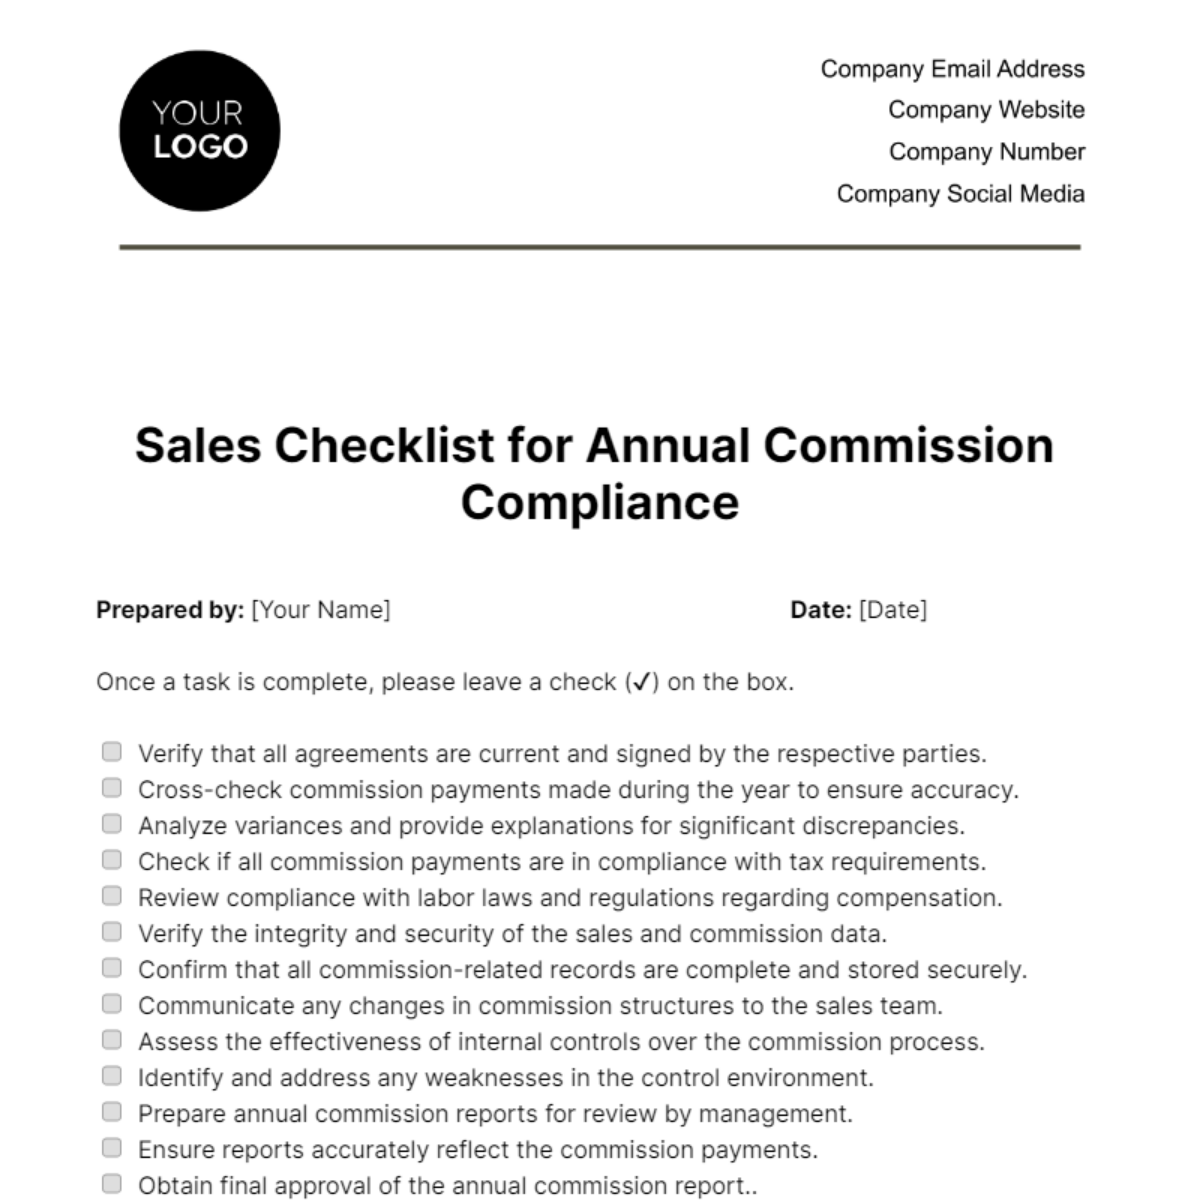 Free Sales Checklist for Annual Commission Compliance Template